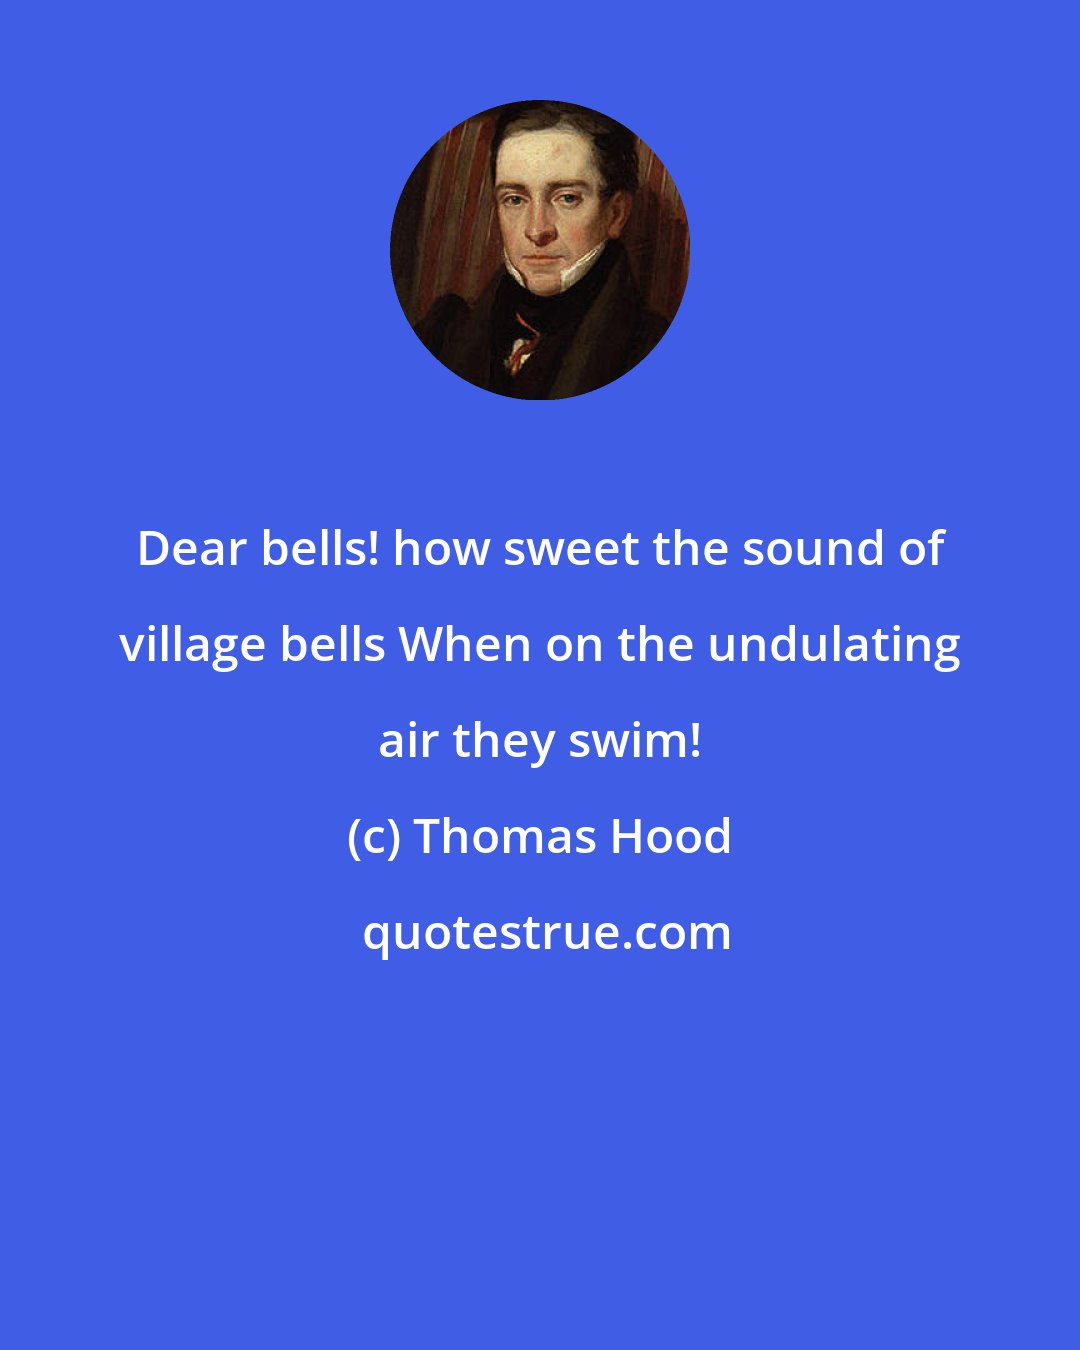 Thomas Hood: Dear bells! how sweet the sound of village bells When on the undulating air they swim!